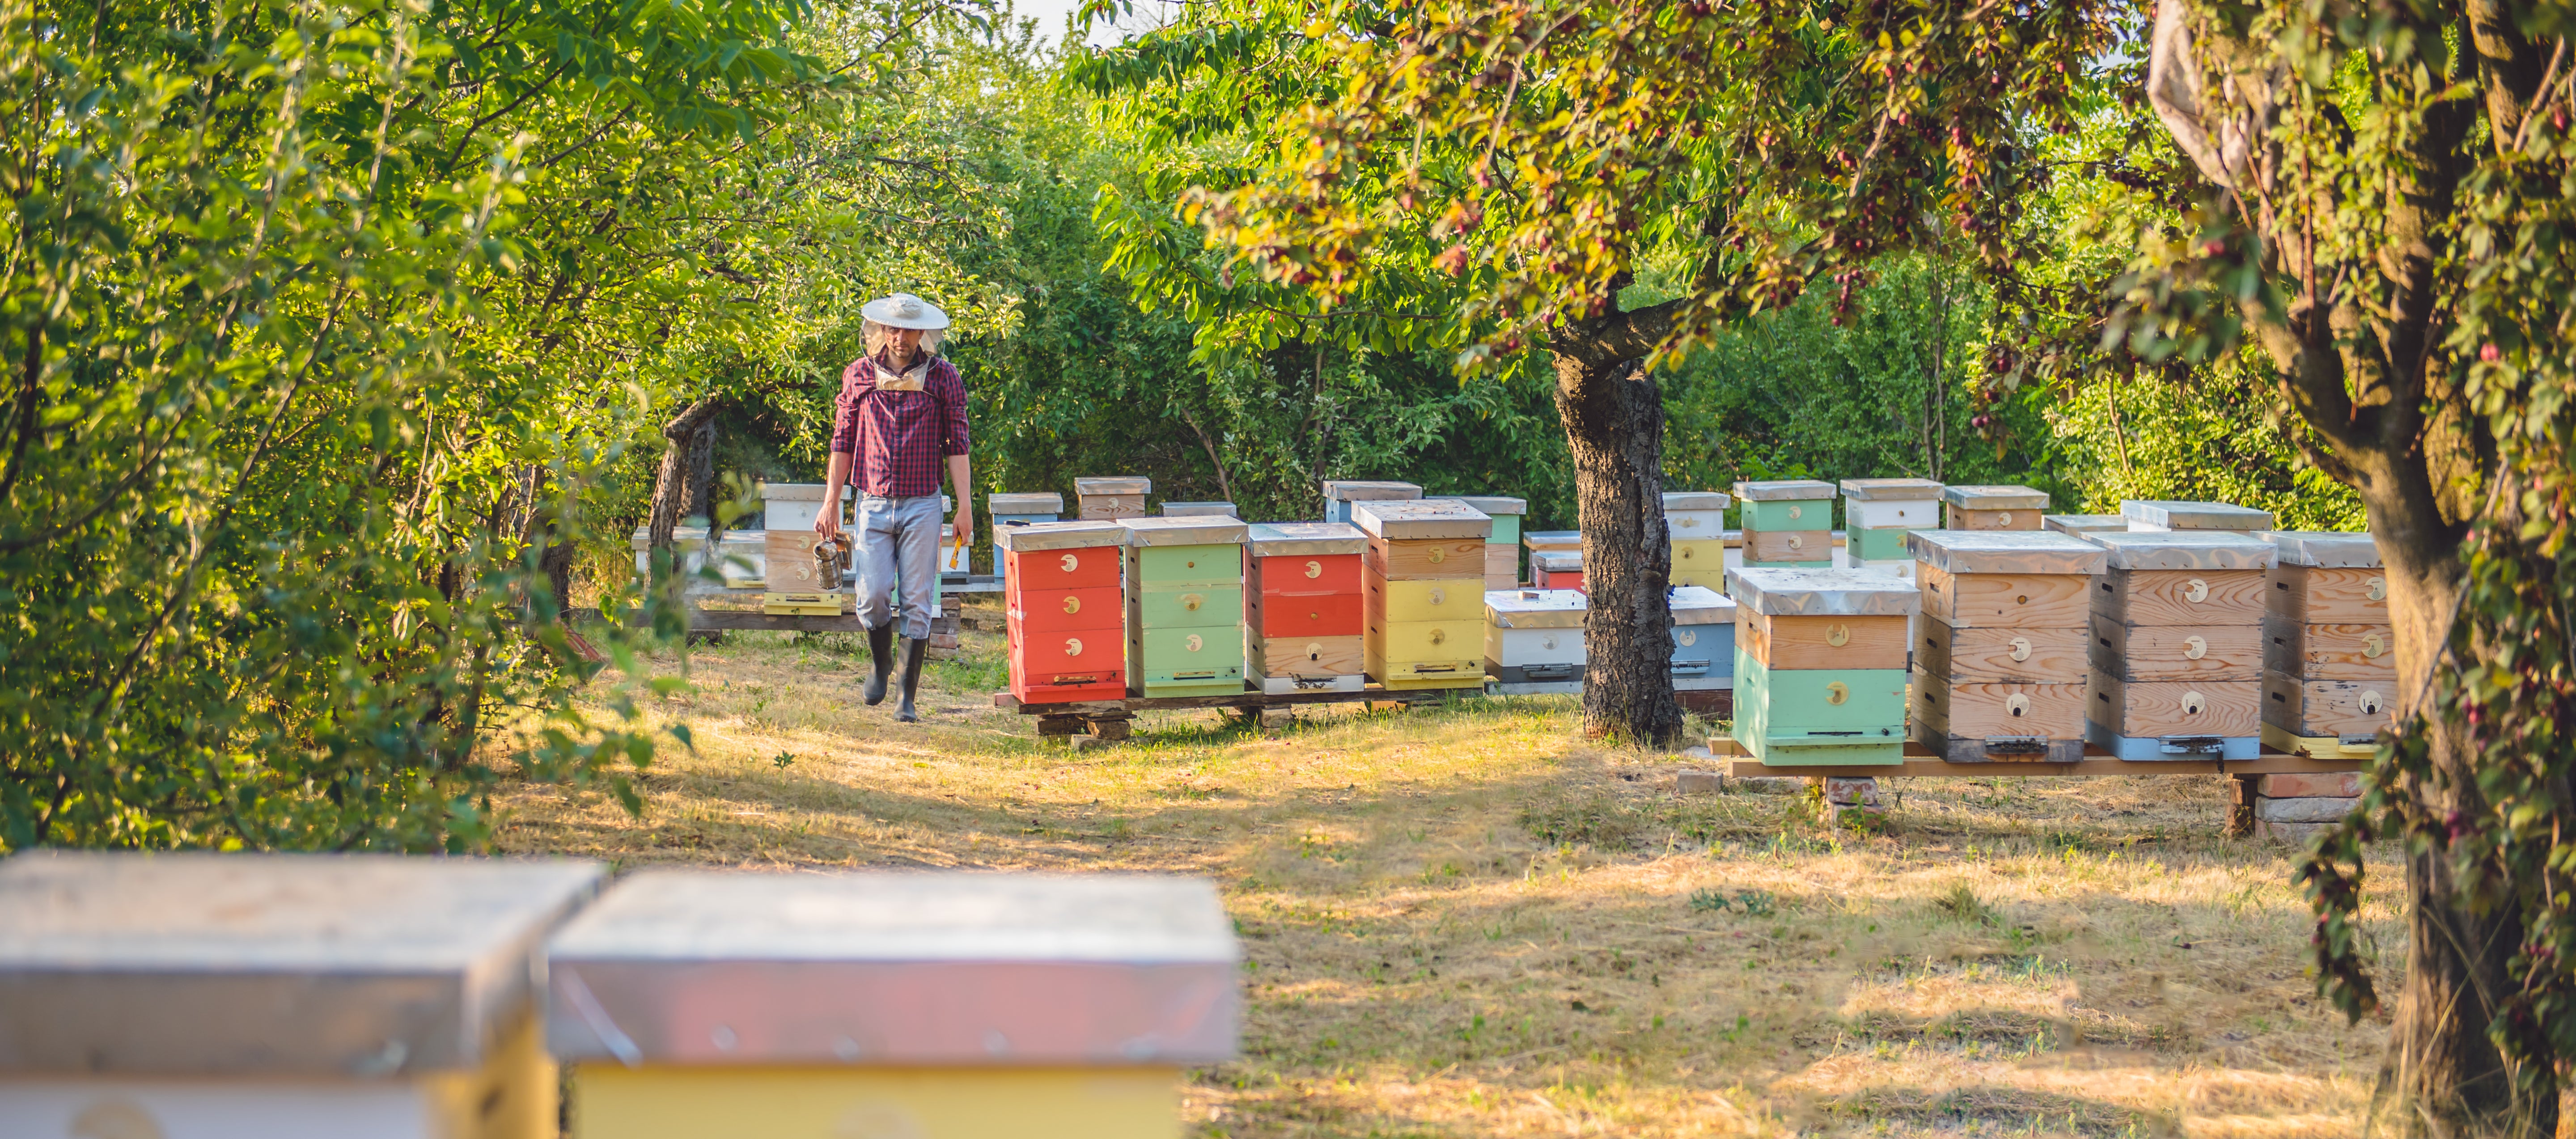 Which Beehive Design is Right for Urban and Backyard Beekeeping? Topbar Hives & More